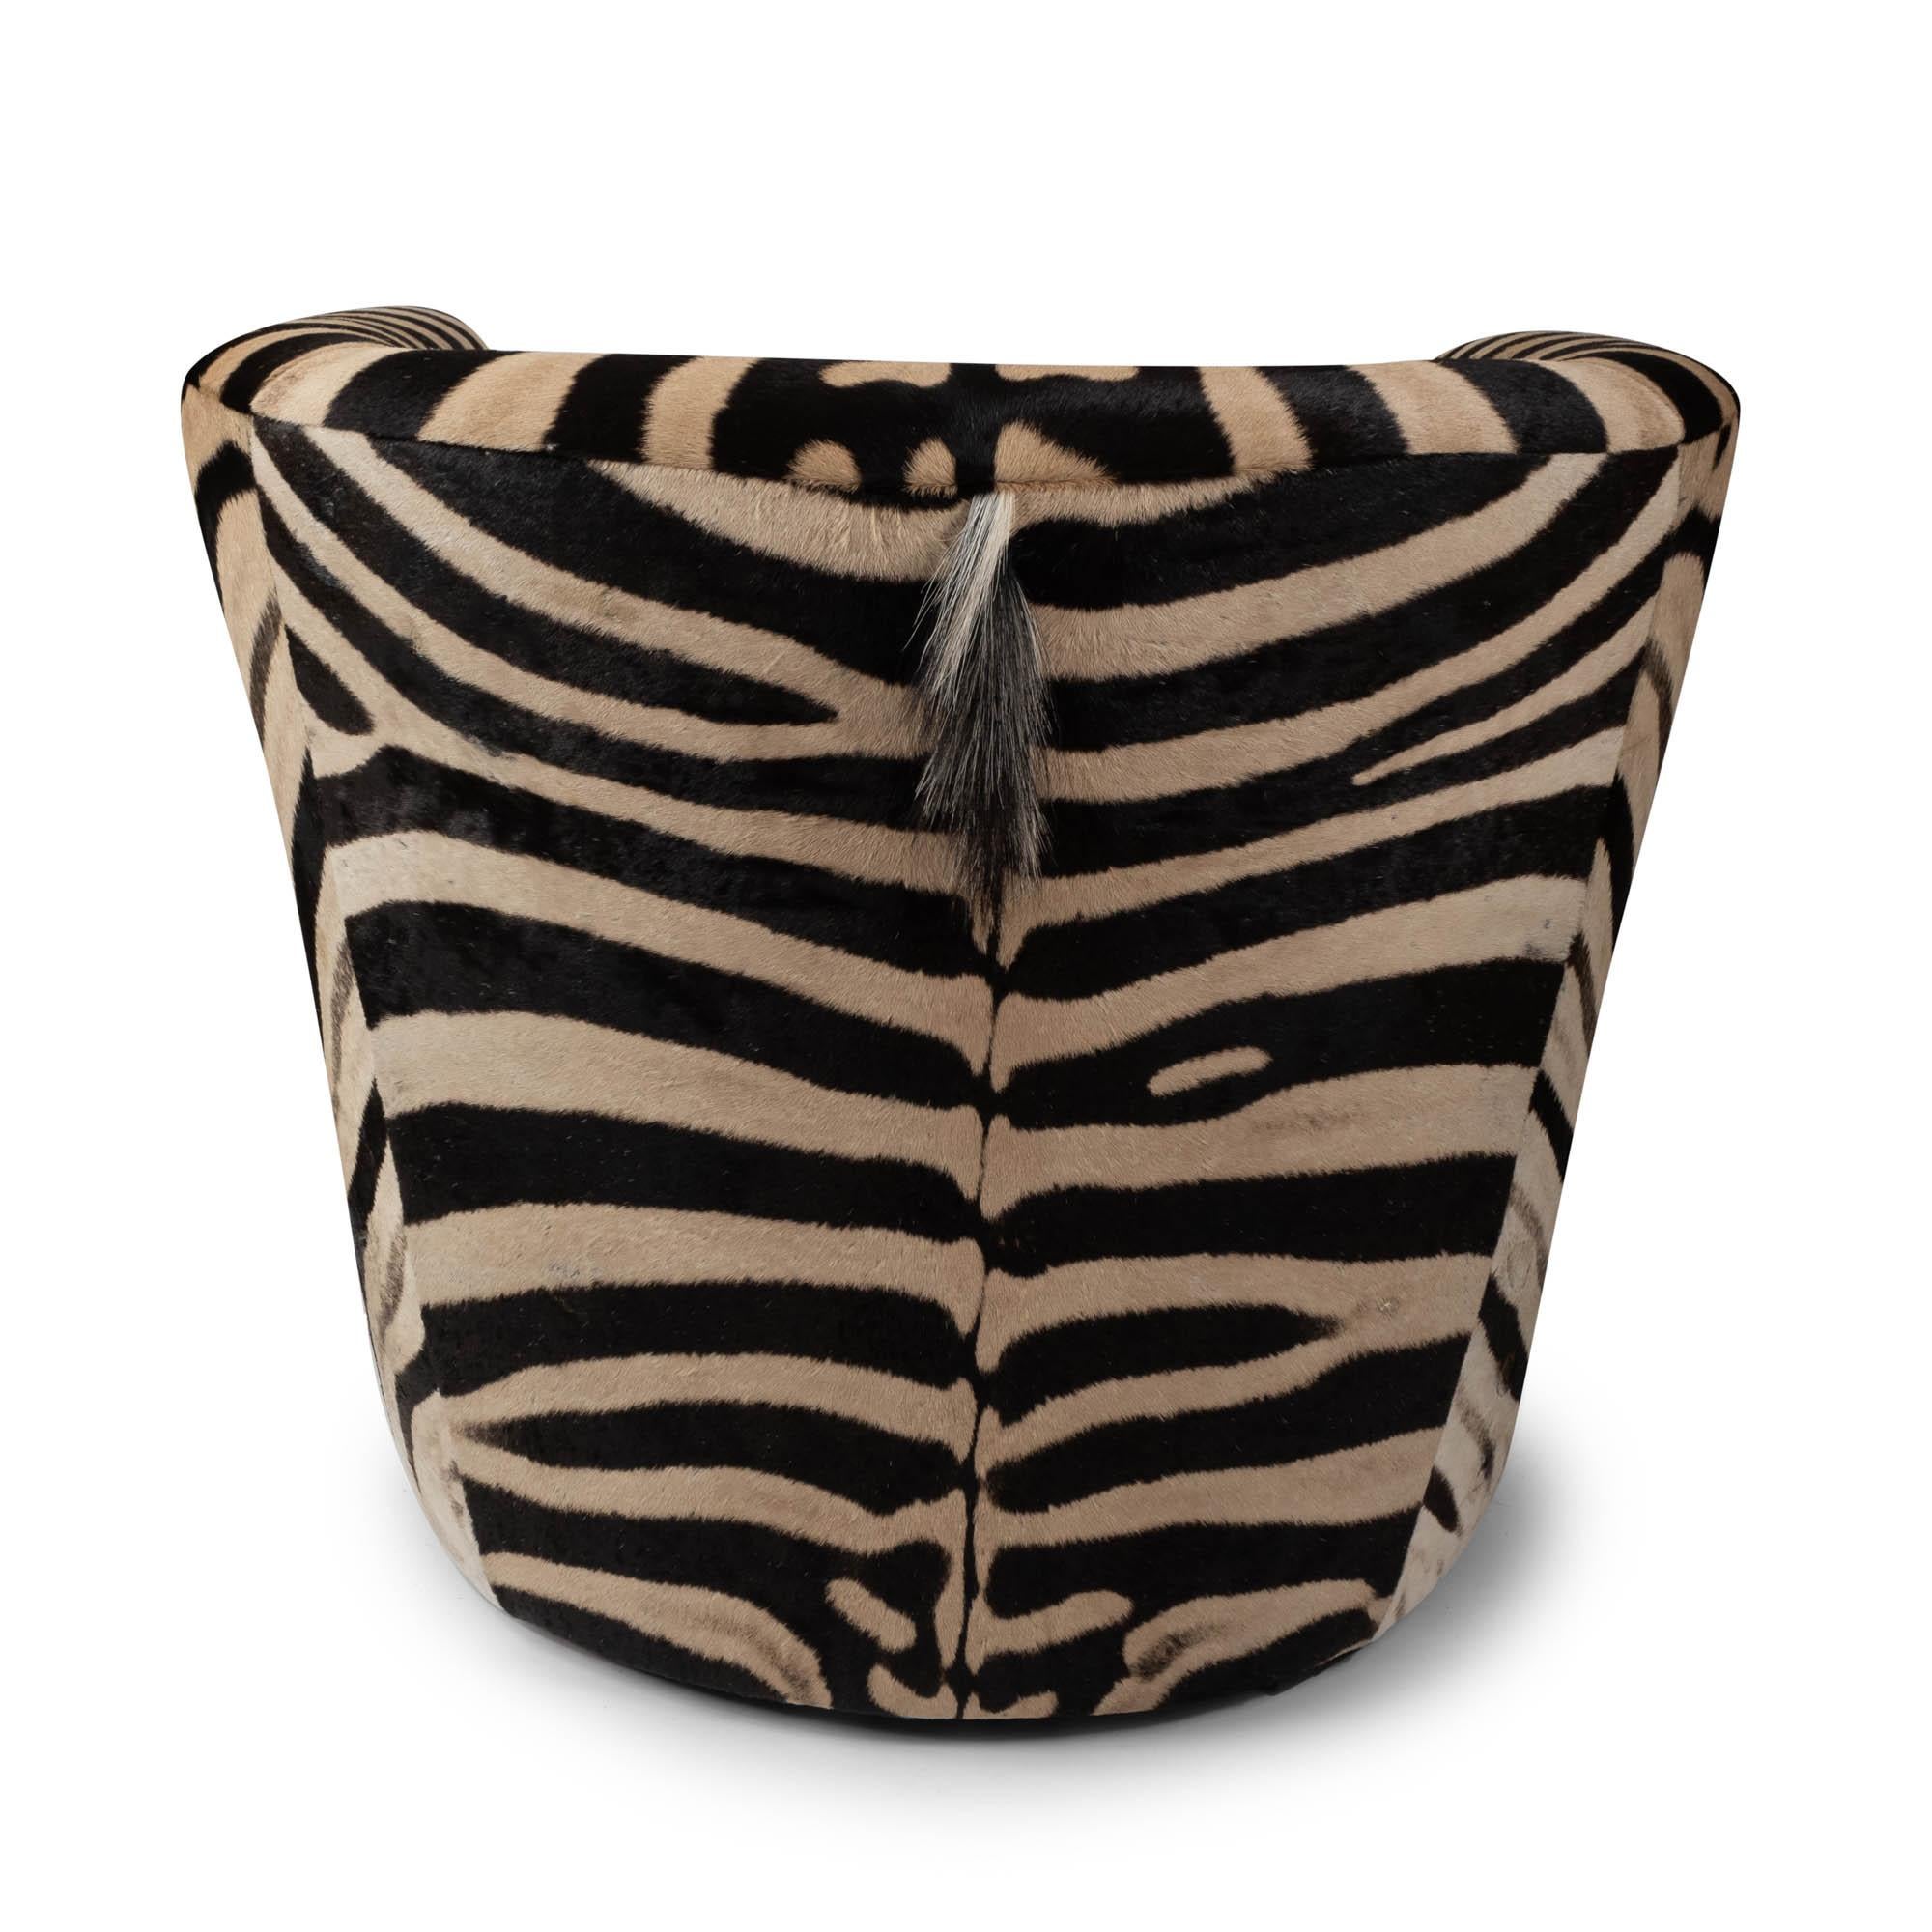 Genuine zebra hide creates an occasional chair sure to make a statement. Each chair requires two full hides to upholster and manufacture making every chair one-of-a-kind. Due to the use of natural materials, each piece is unique and may vary